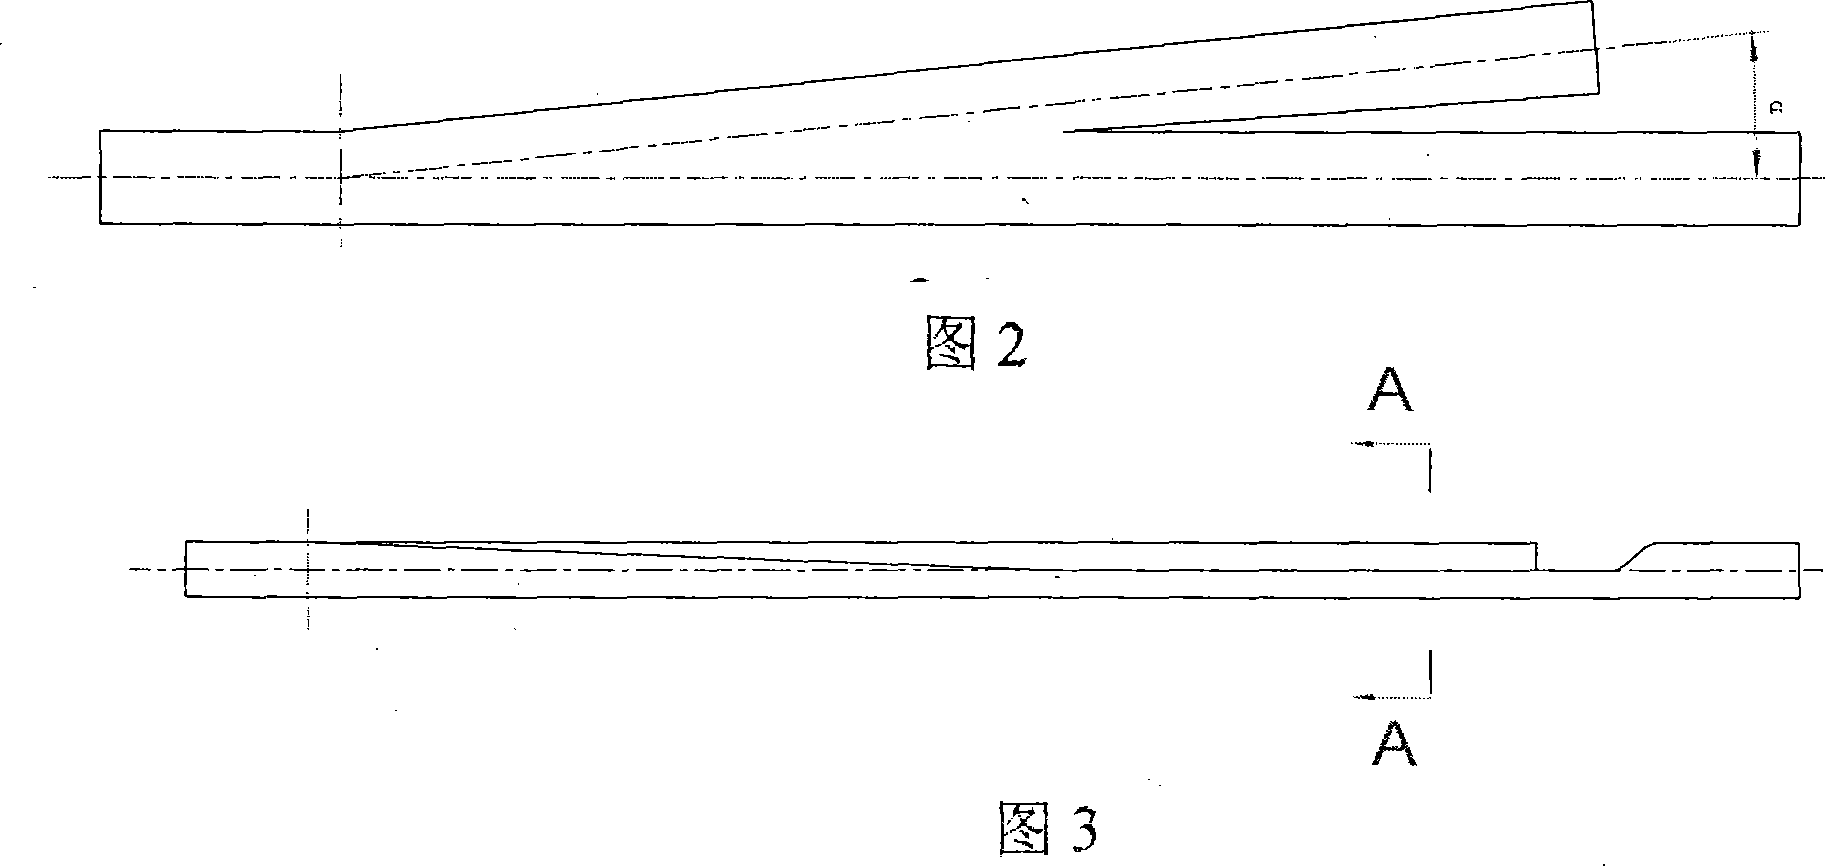 Method for implementing branch well window seal by using metal expansion tube